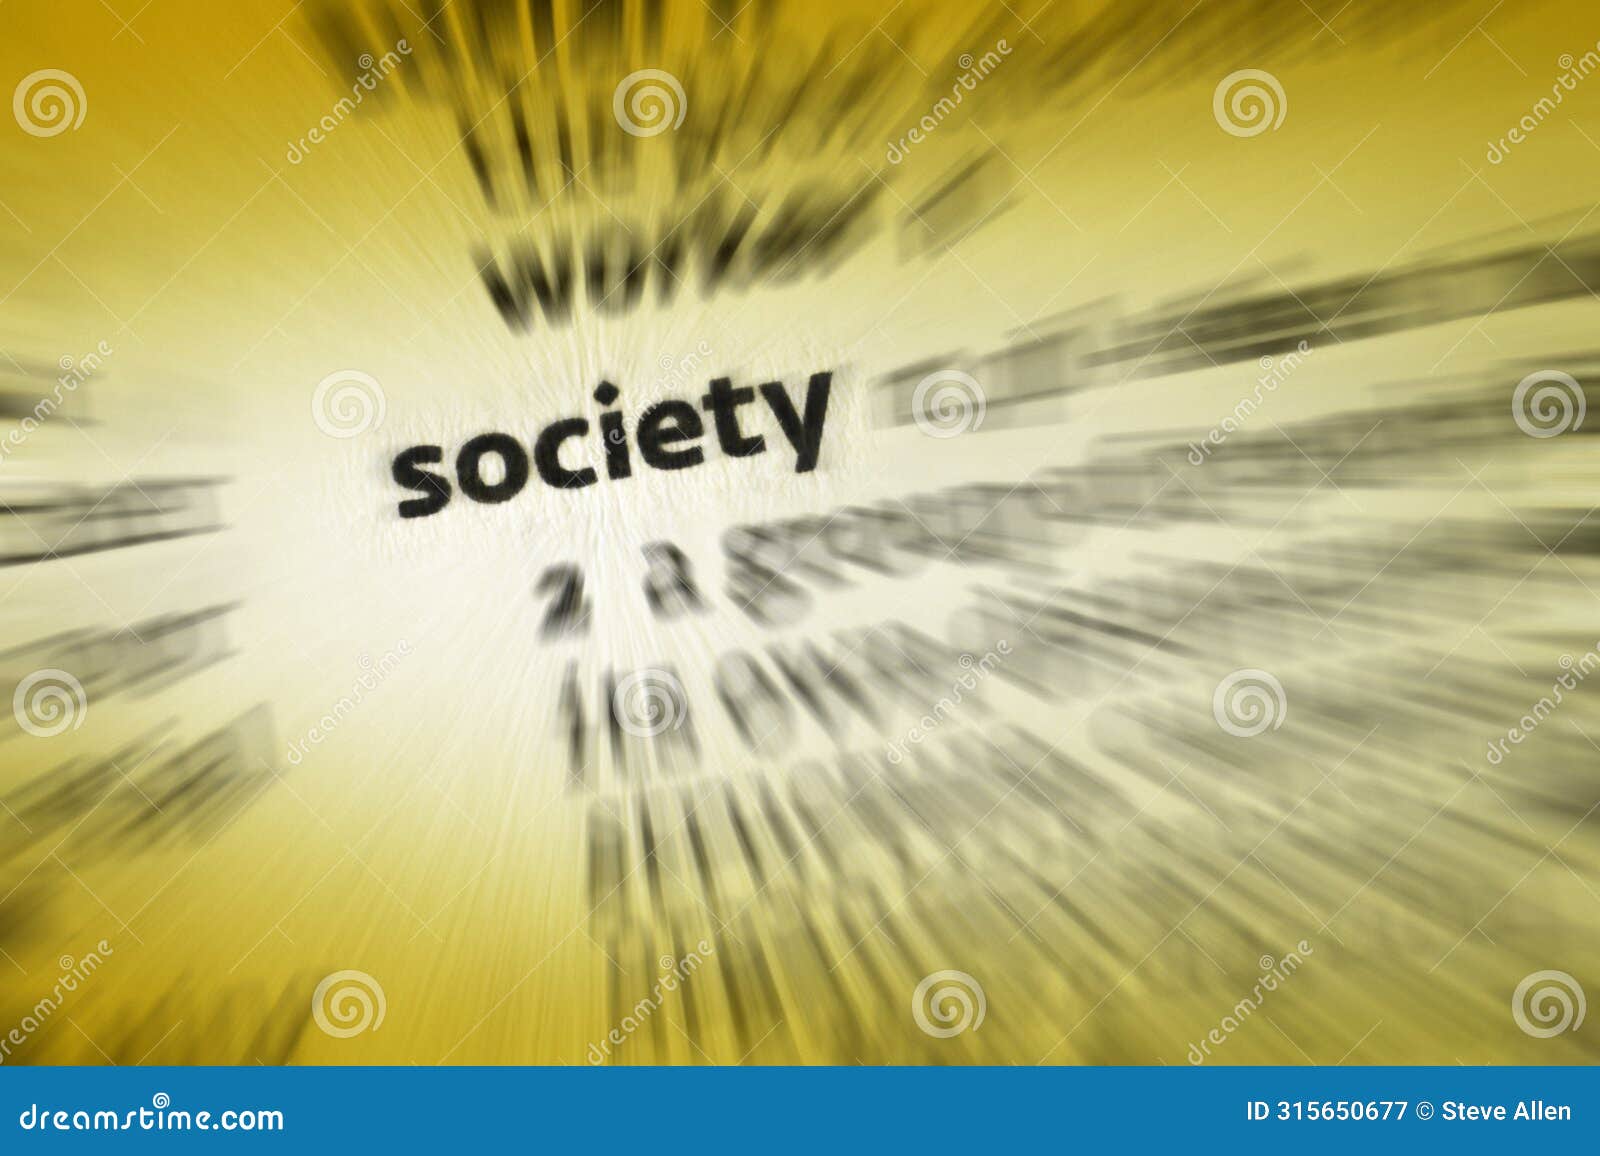 society - community of people